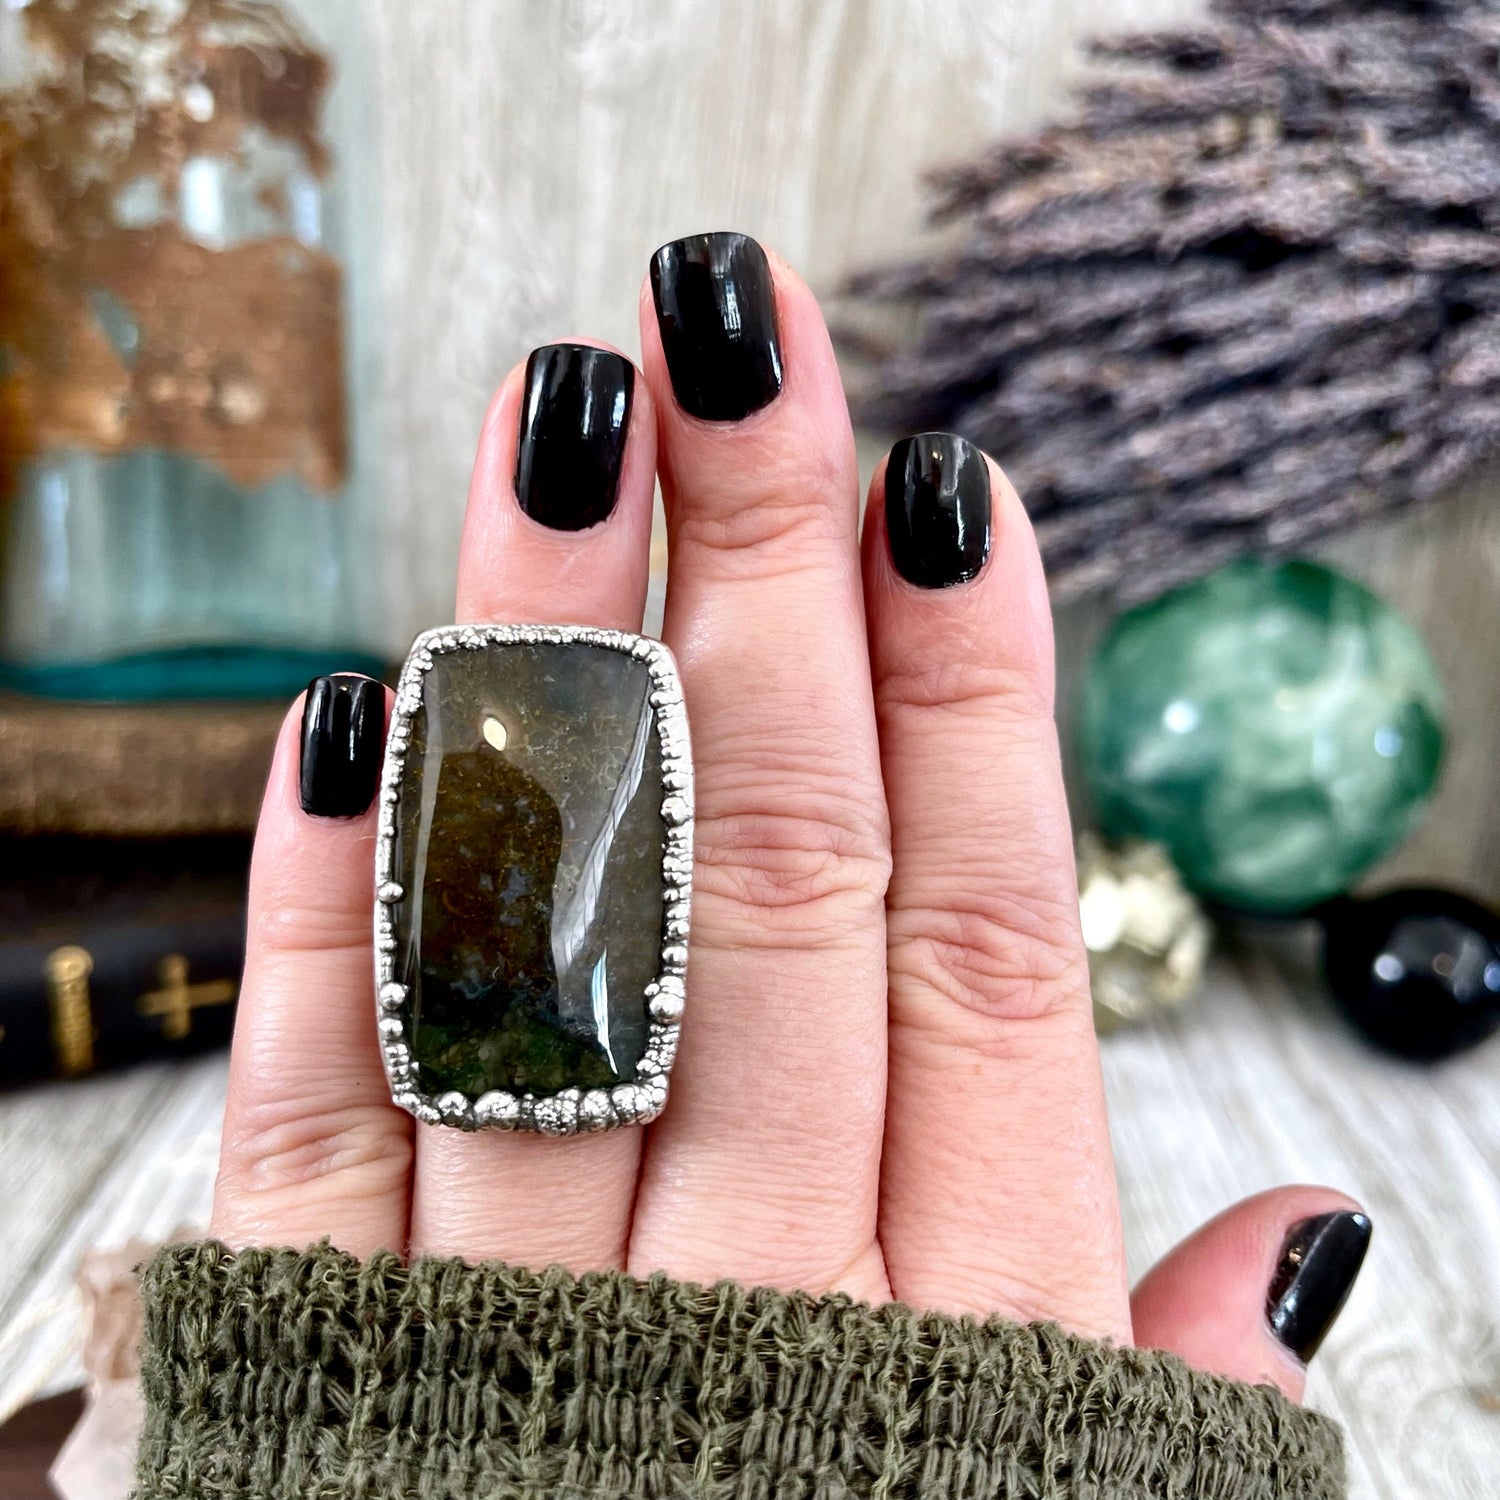 Big Size 6 Silver Natural Fancy Moss Agate Crystal Statement Ring / Foxlark Collection - One of a Kind / Big Crystal Ring Witchy Jewelry